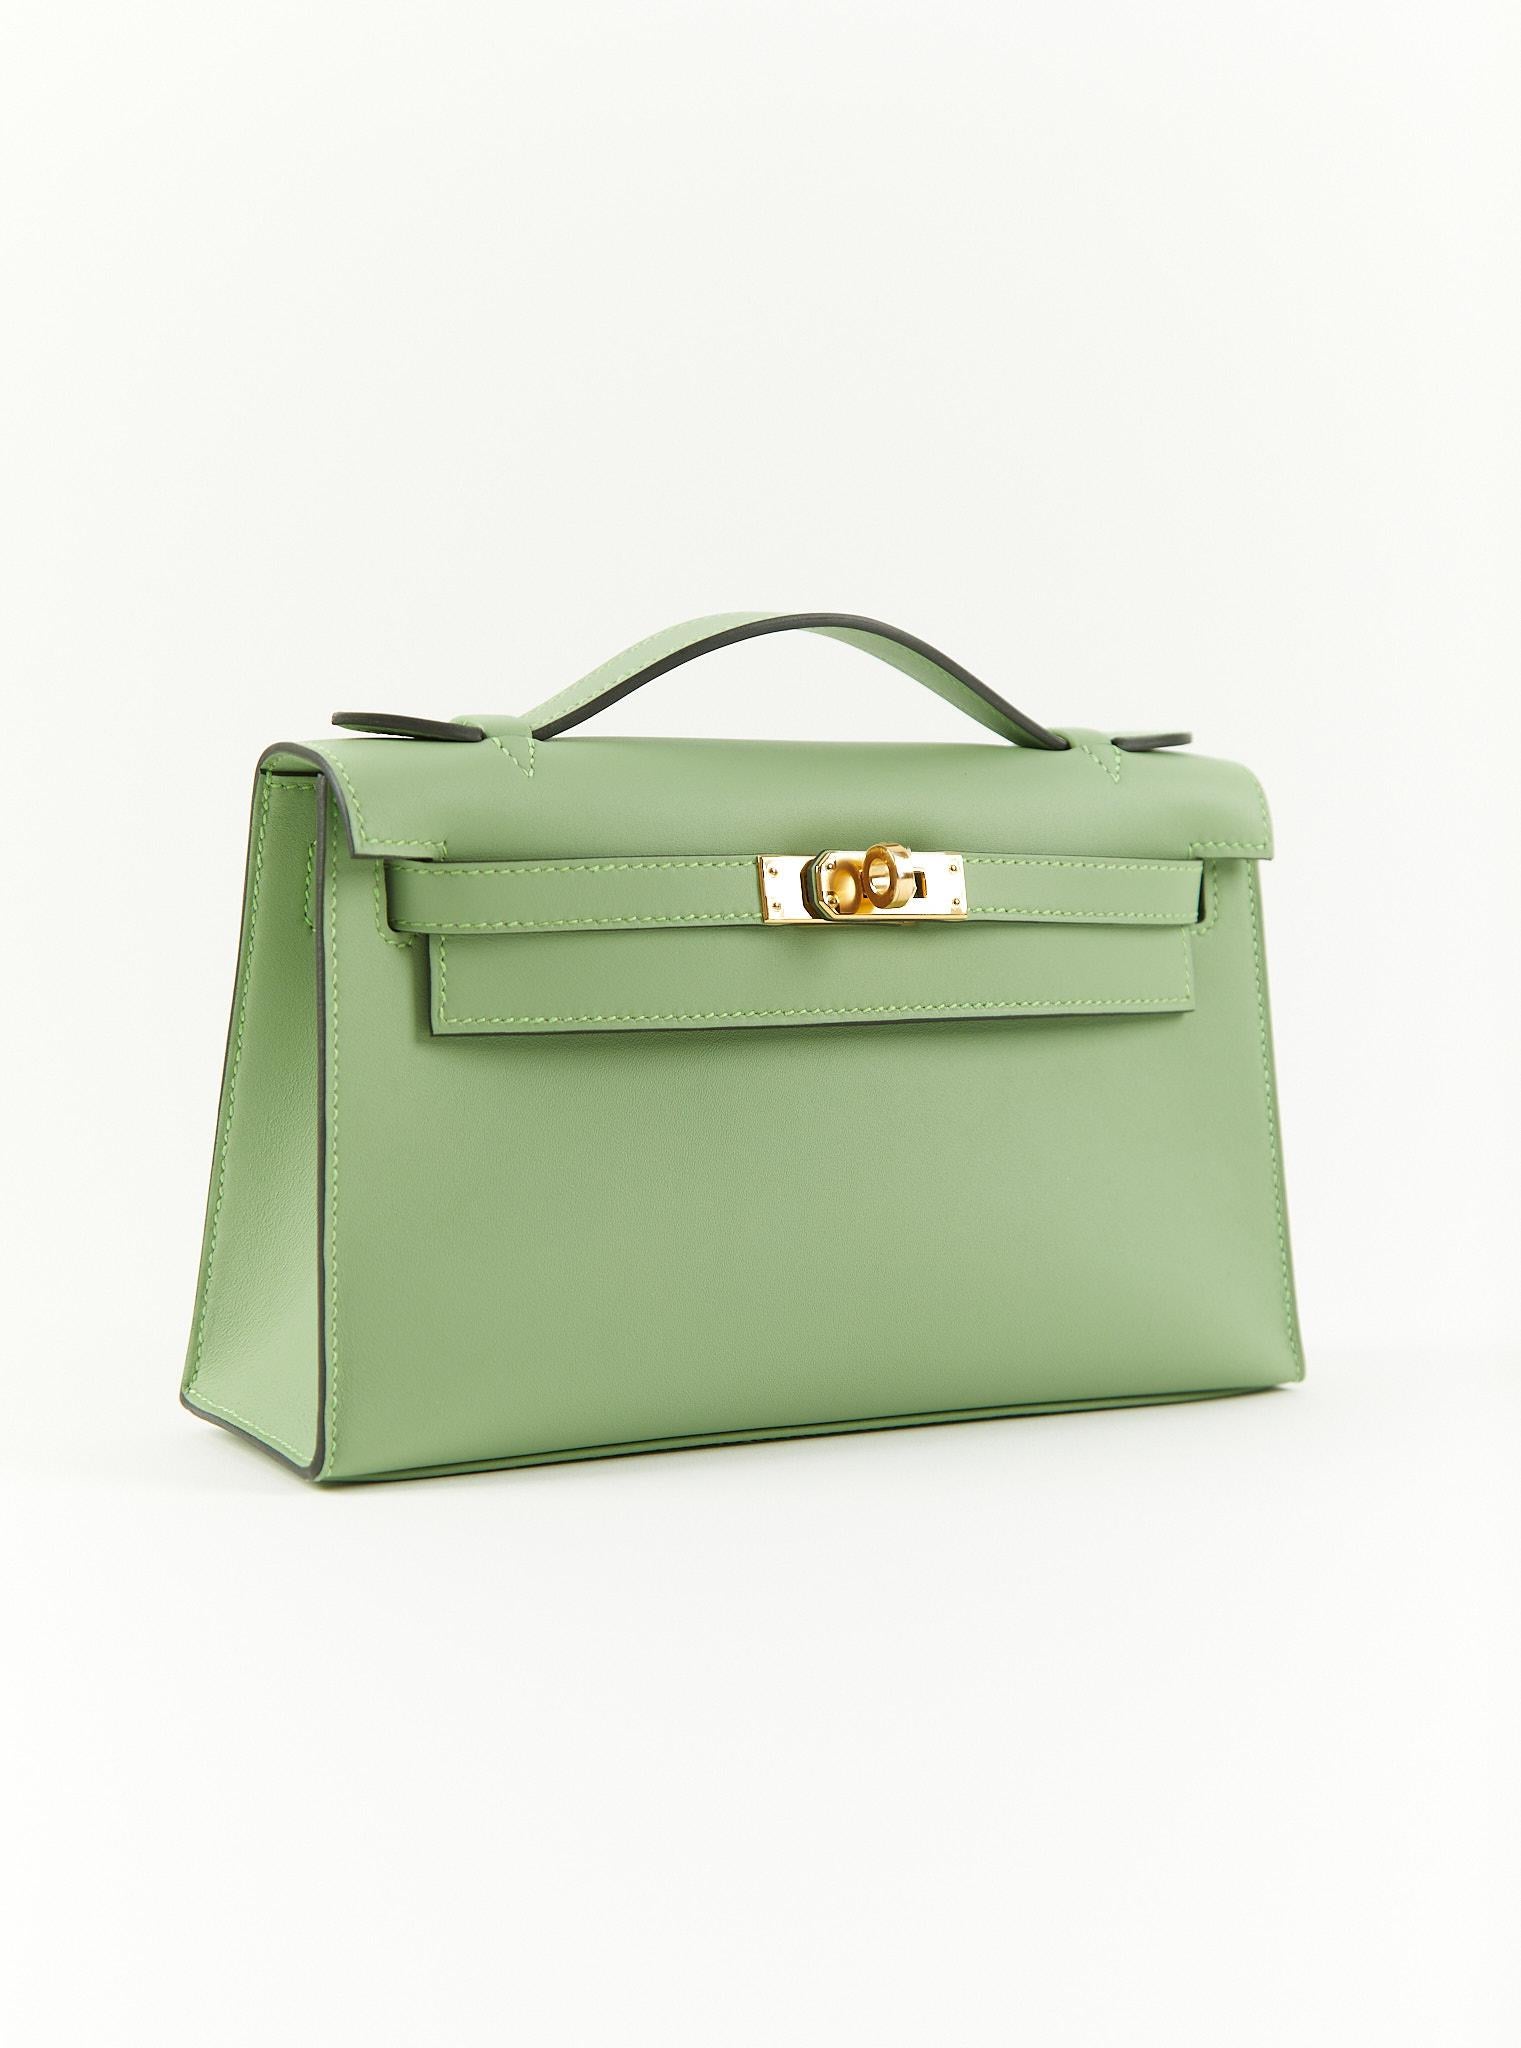 Hermès Kelly Pochette in Vert Criquet

Swift Leather with Gold Hardware

B Stamp / 2024

Accompanied by: Original receipt, Hermes box, Hermes dustbag, felt, ribbon and care card

Measurements: 8.5